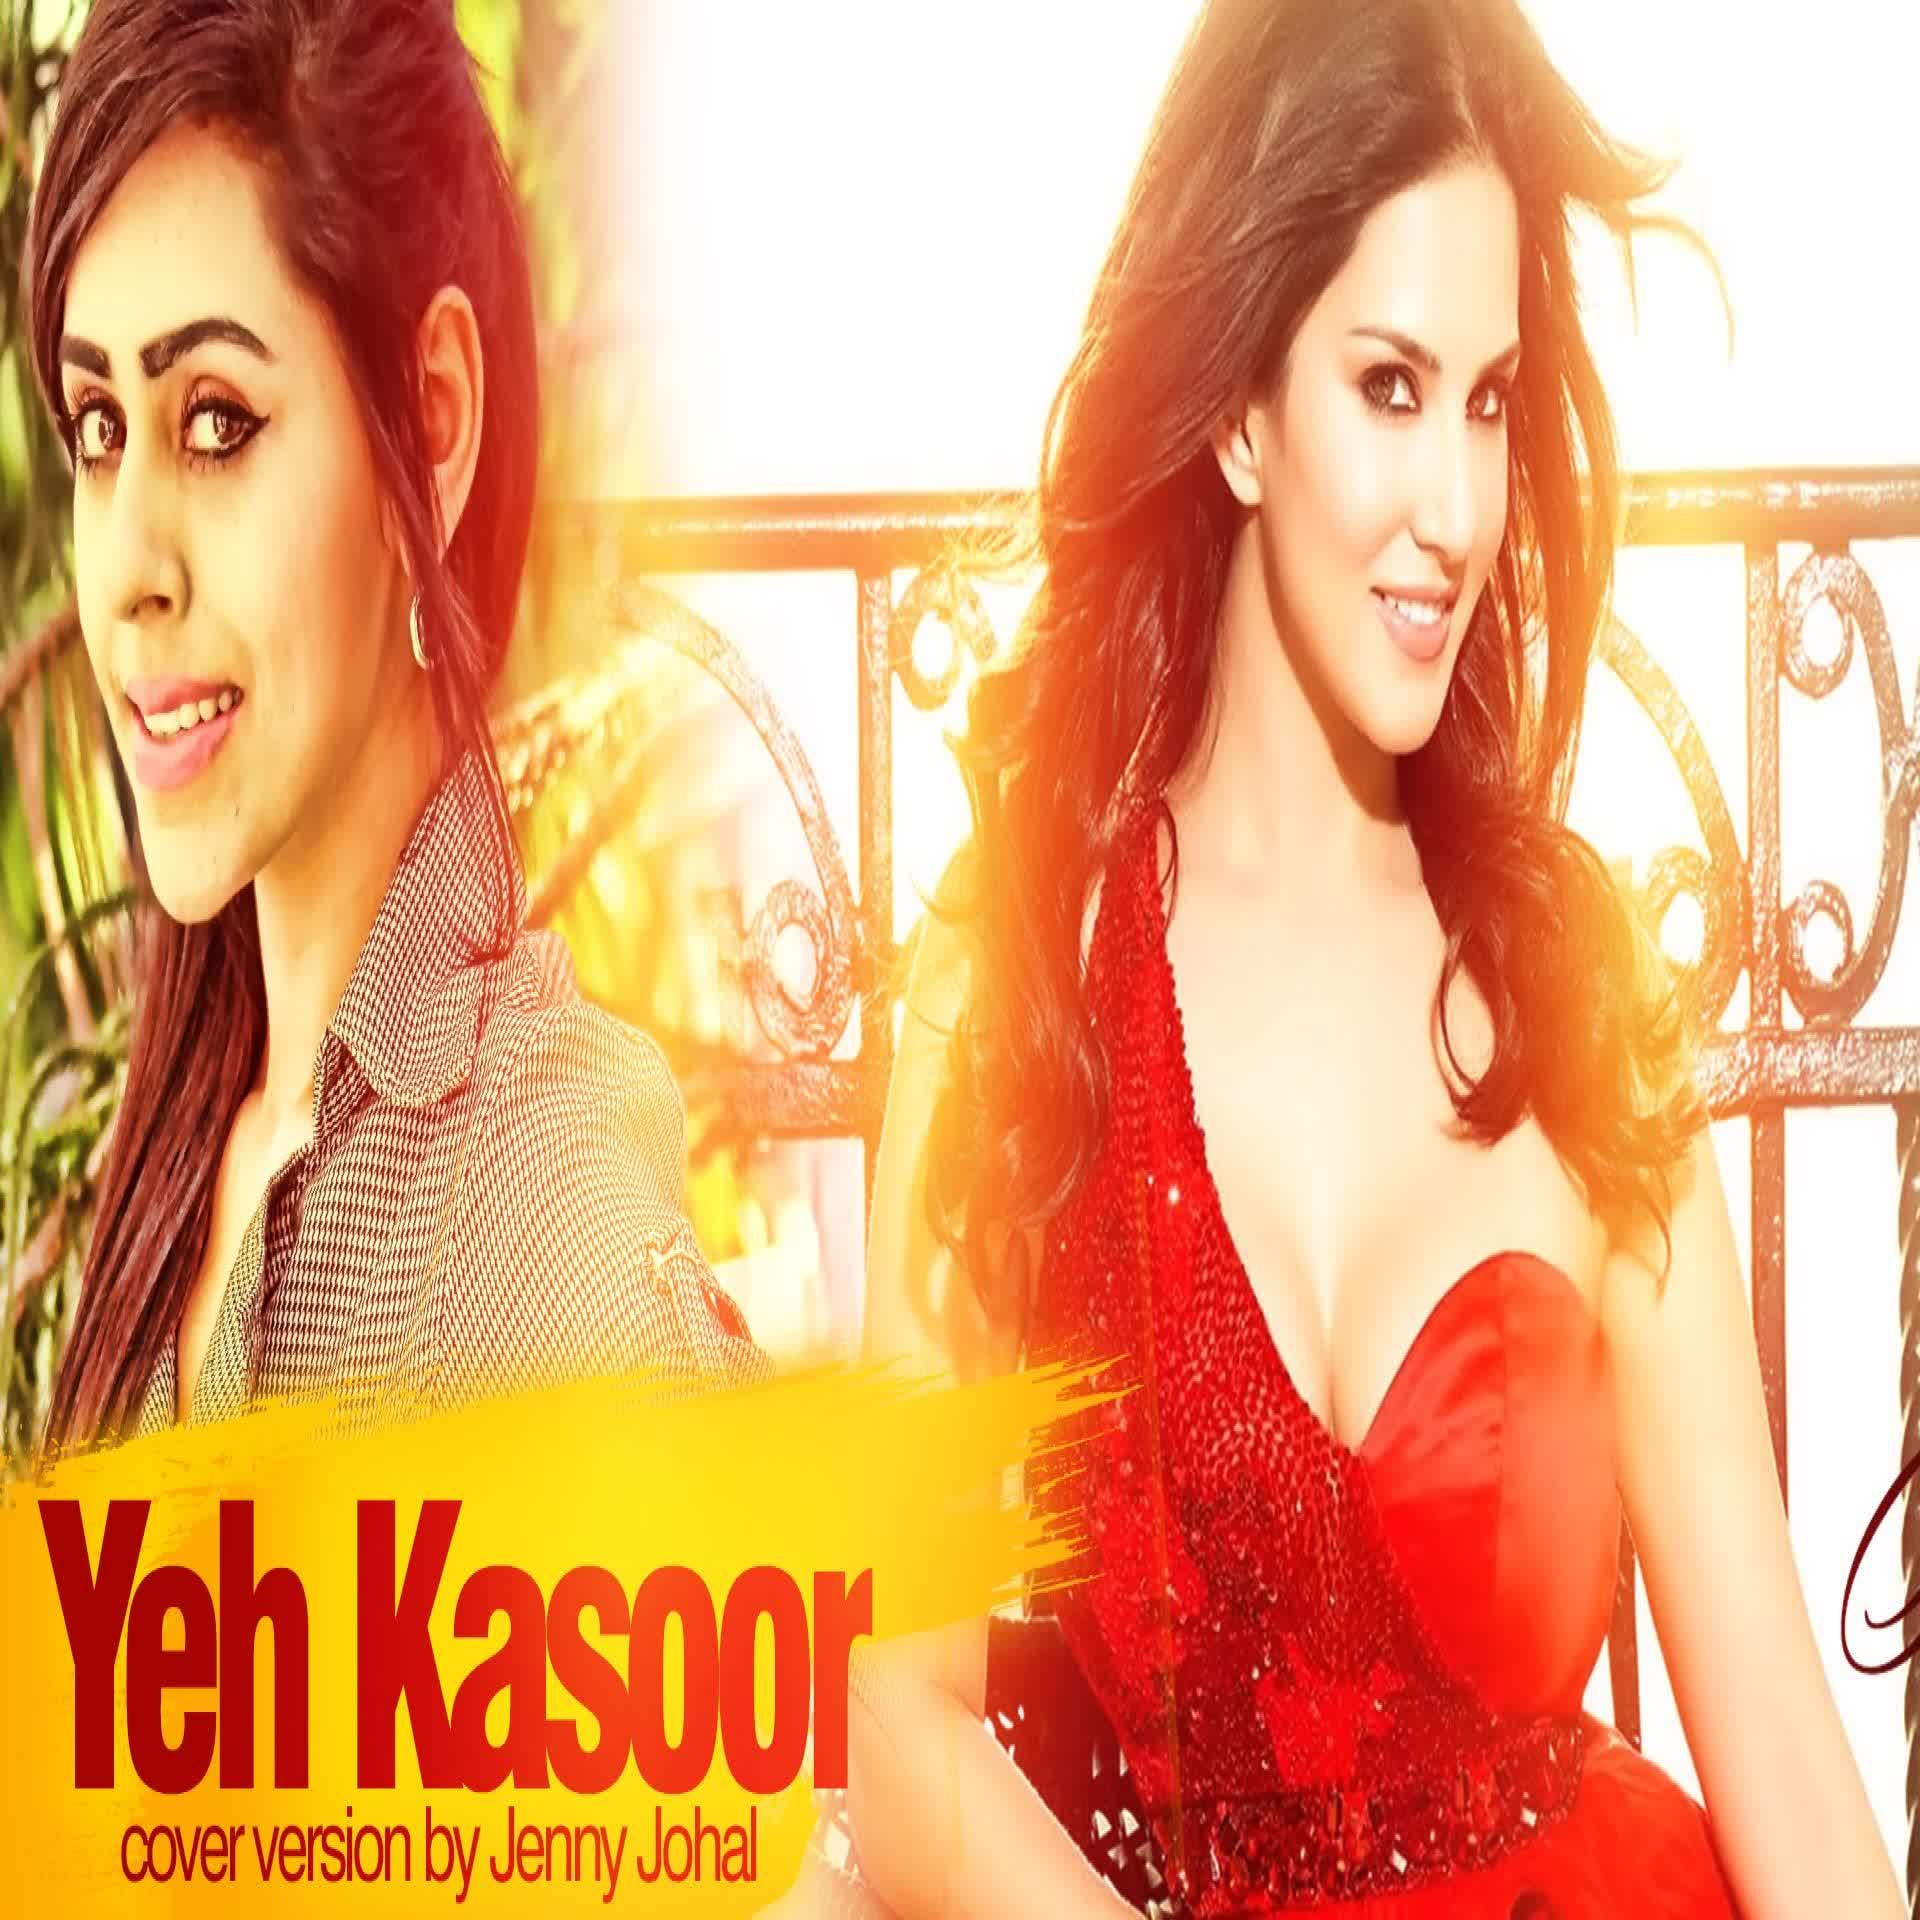 Yeh Kasoor (Cover) Jenny Johal Mp3 Song